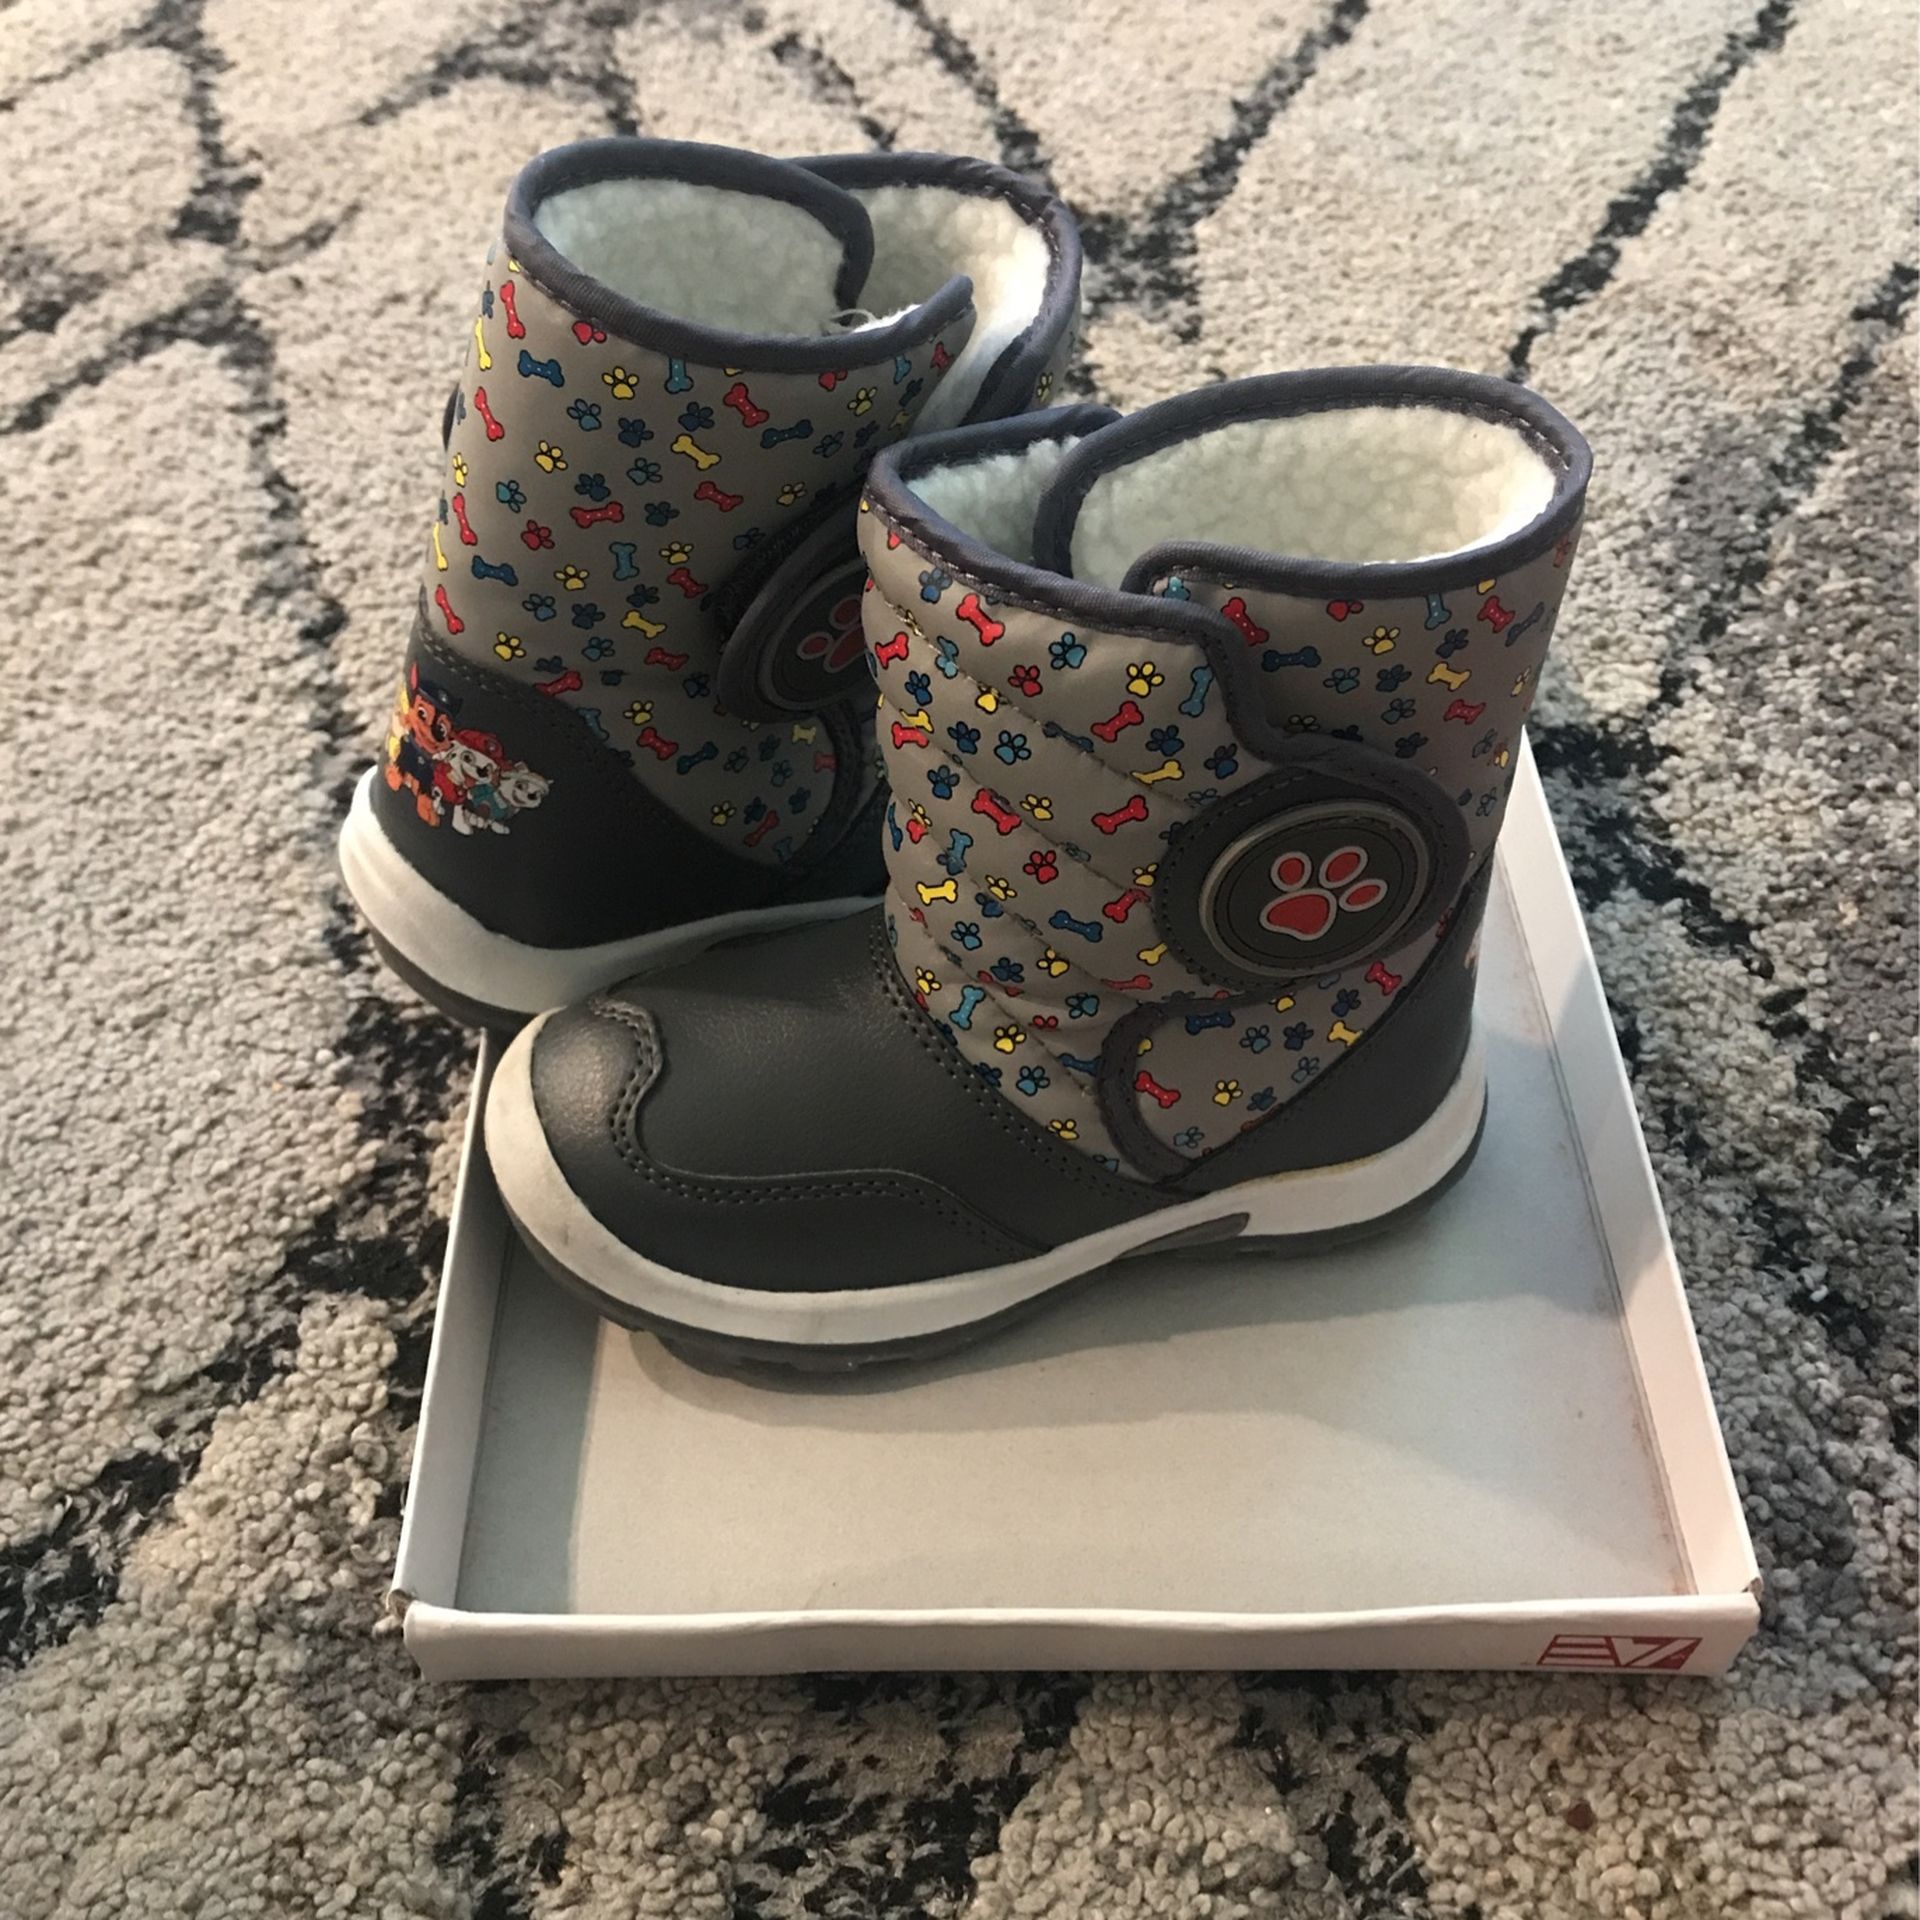 Paw Patrol Snow Boots Toddler Size 9